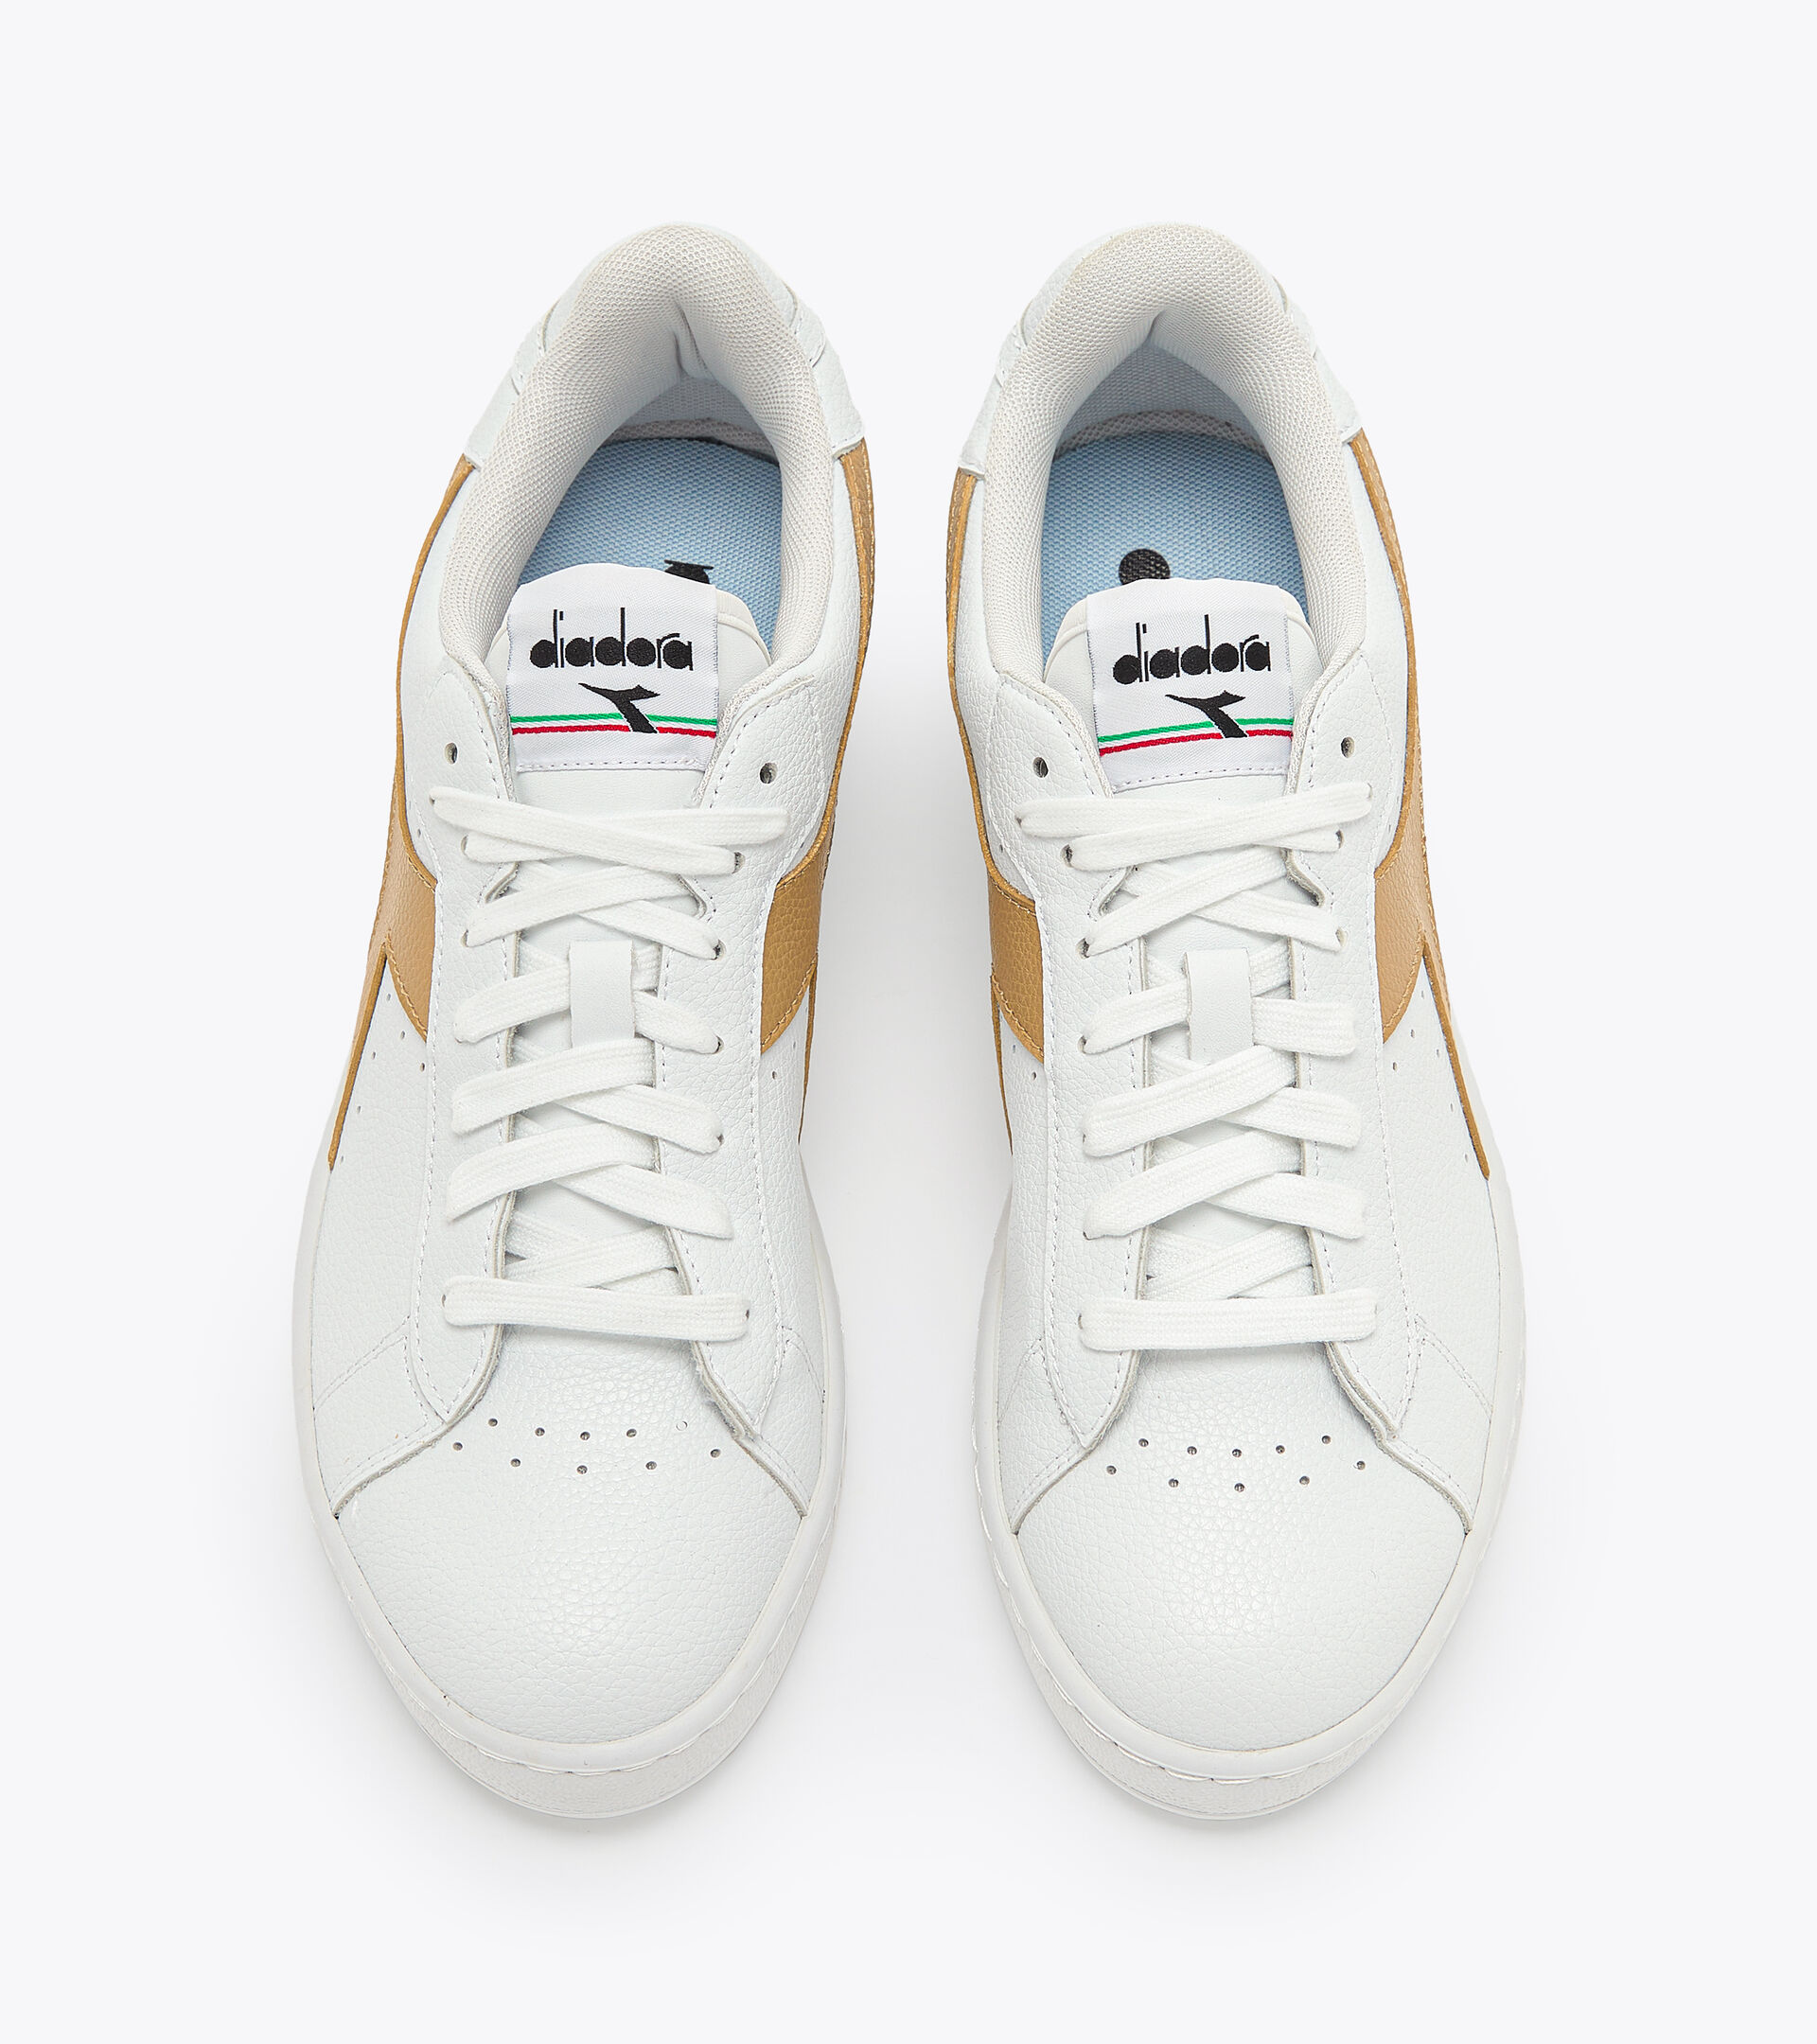 Sporty sneakers - Unisex GAME L LOW 2030 WHITE/ICED COFFEE - Diadora